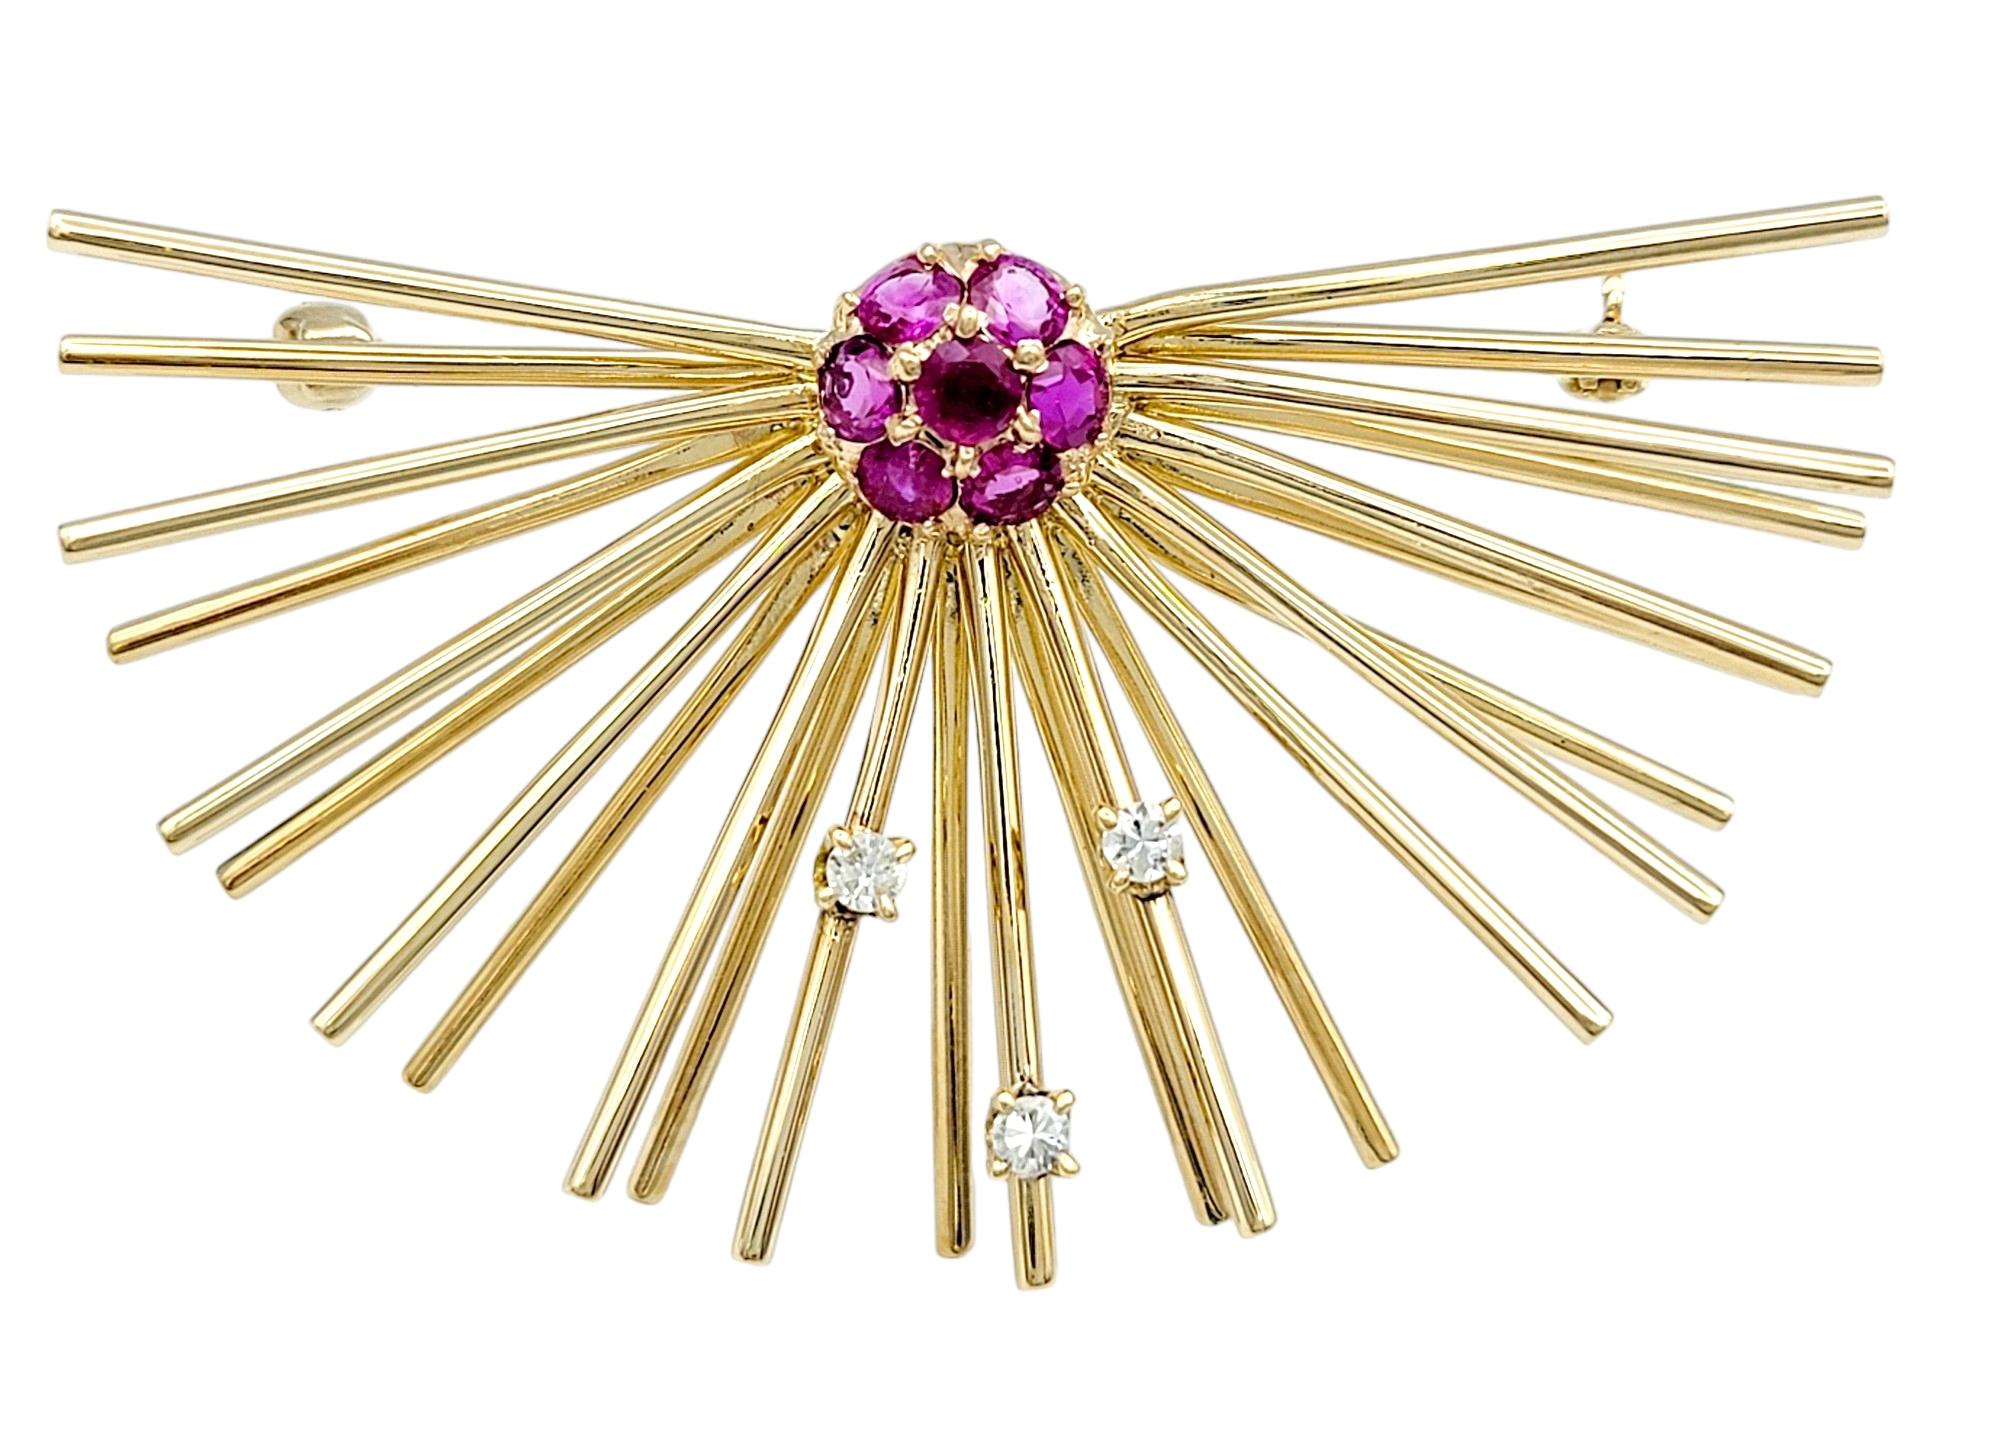 Introducing a stunning vintage Sputnik-style brooch, exuding timeless elegance in 14k yellow gold. This exquisite brooch captures the essence of the iconic space-age design with spiky details that add a touch of celestial charm. Crafted with